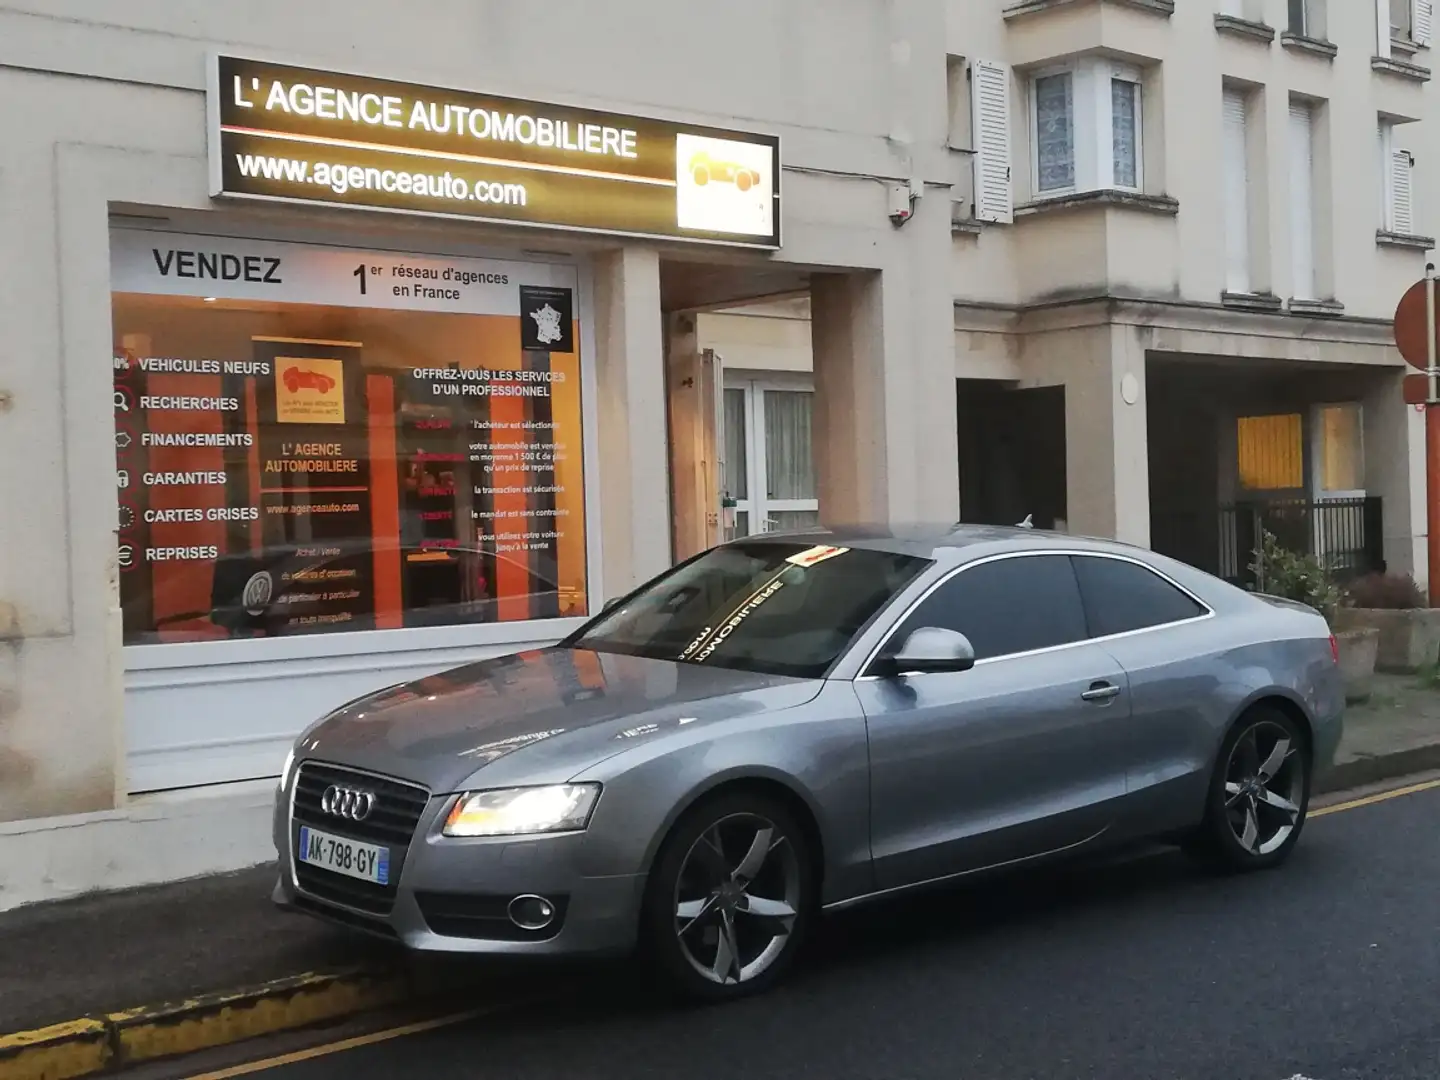 Audi A5 2.7 V6 TDI 190ch Ambition Luxe Multitronic carnet Gris - 1